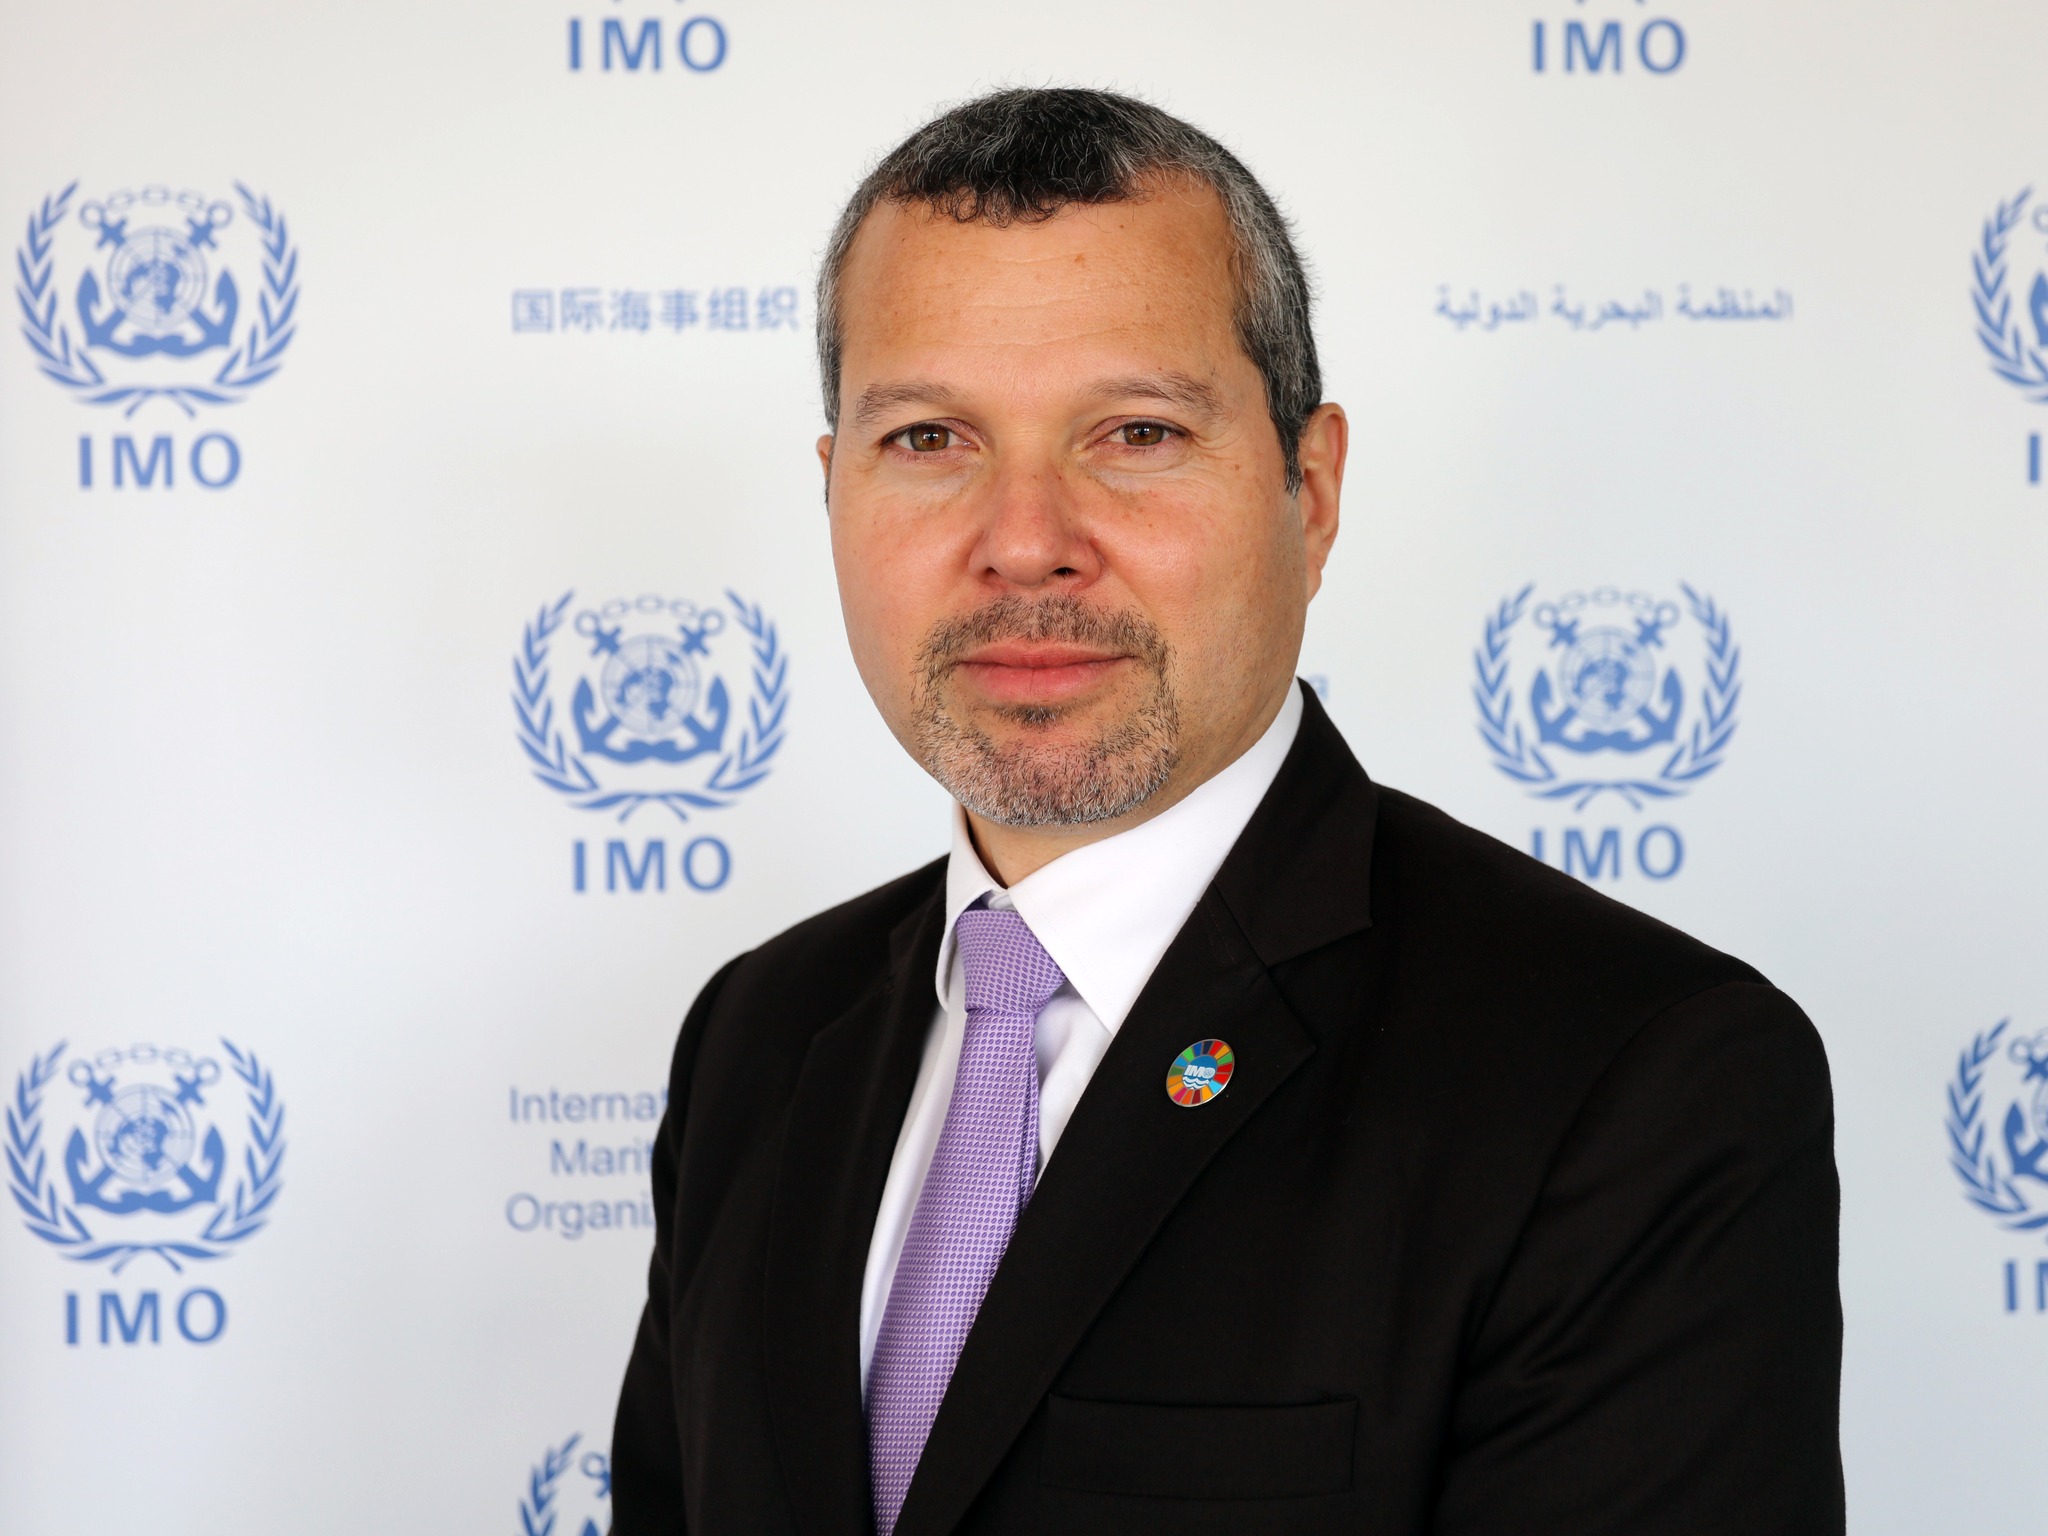 The IMO Council has appointed Mr. Arsenio Antonio Dominguez Velasco of the Republic of Panama, for an initial 4-year term as next Secretary-General, as of 1 January 2024, subject to the Assembly’s approval.